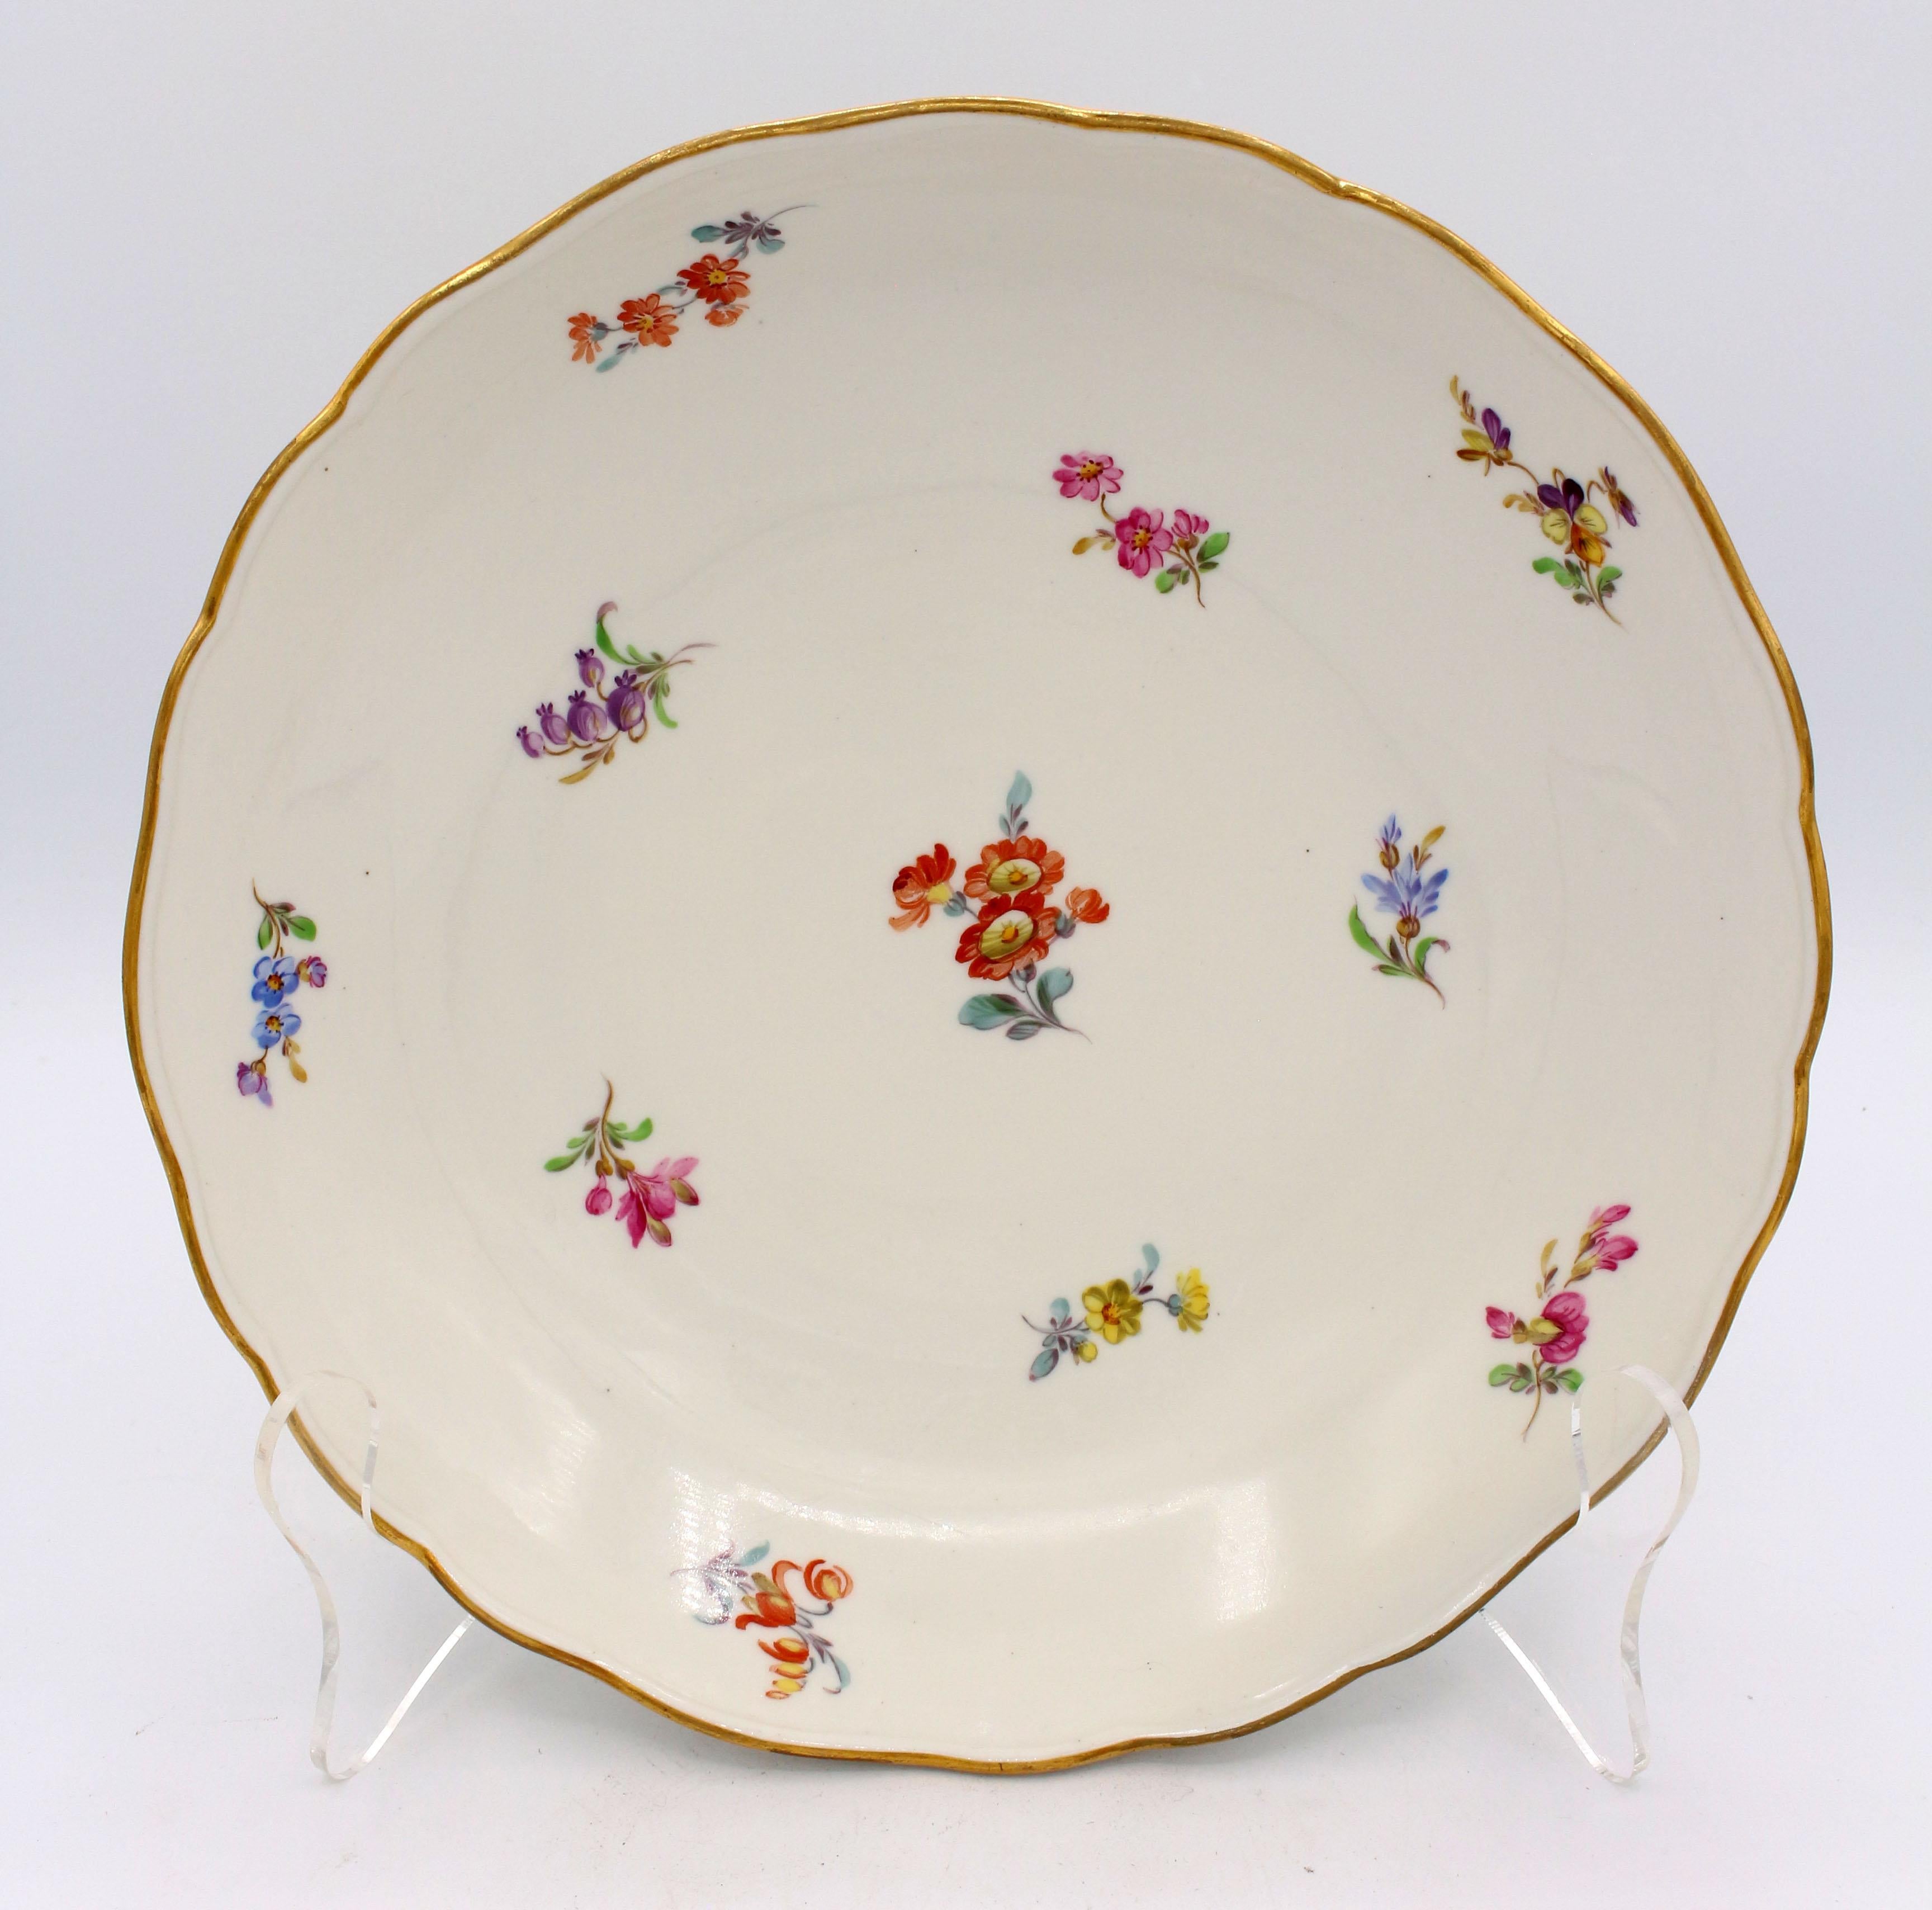 Fruit bowl or low serving bowl with gilt scalloped edge (minor wear), by Meissen in the scattered flowers or streublumen pattern. Crossed swords mark. c.1860-90. Apparent pre-glaze repair.
9 5/8